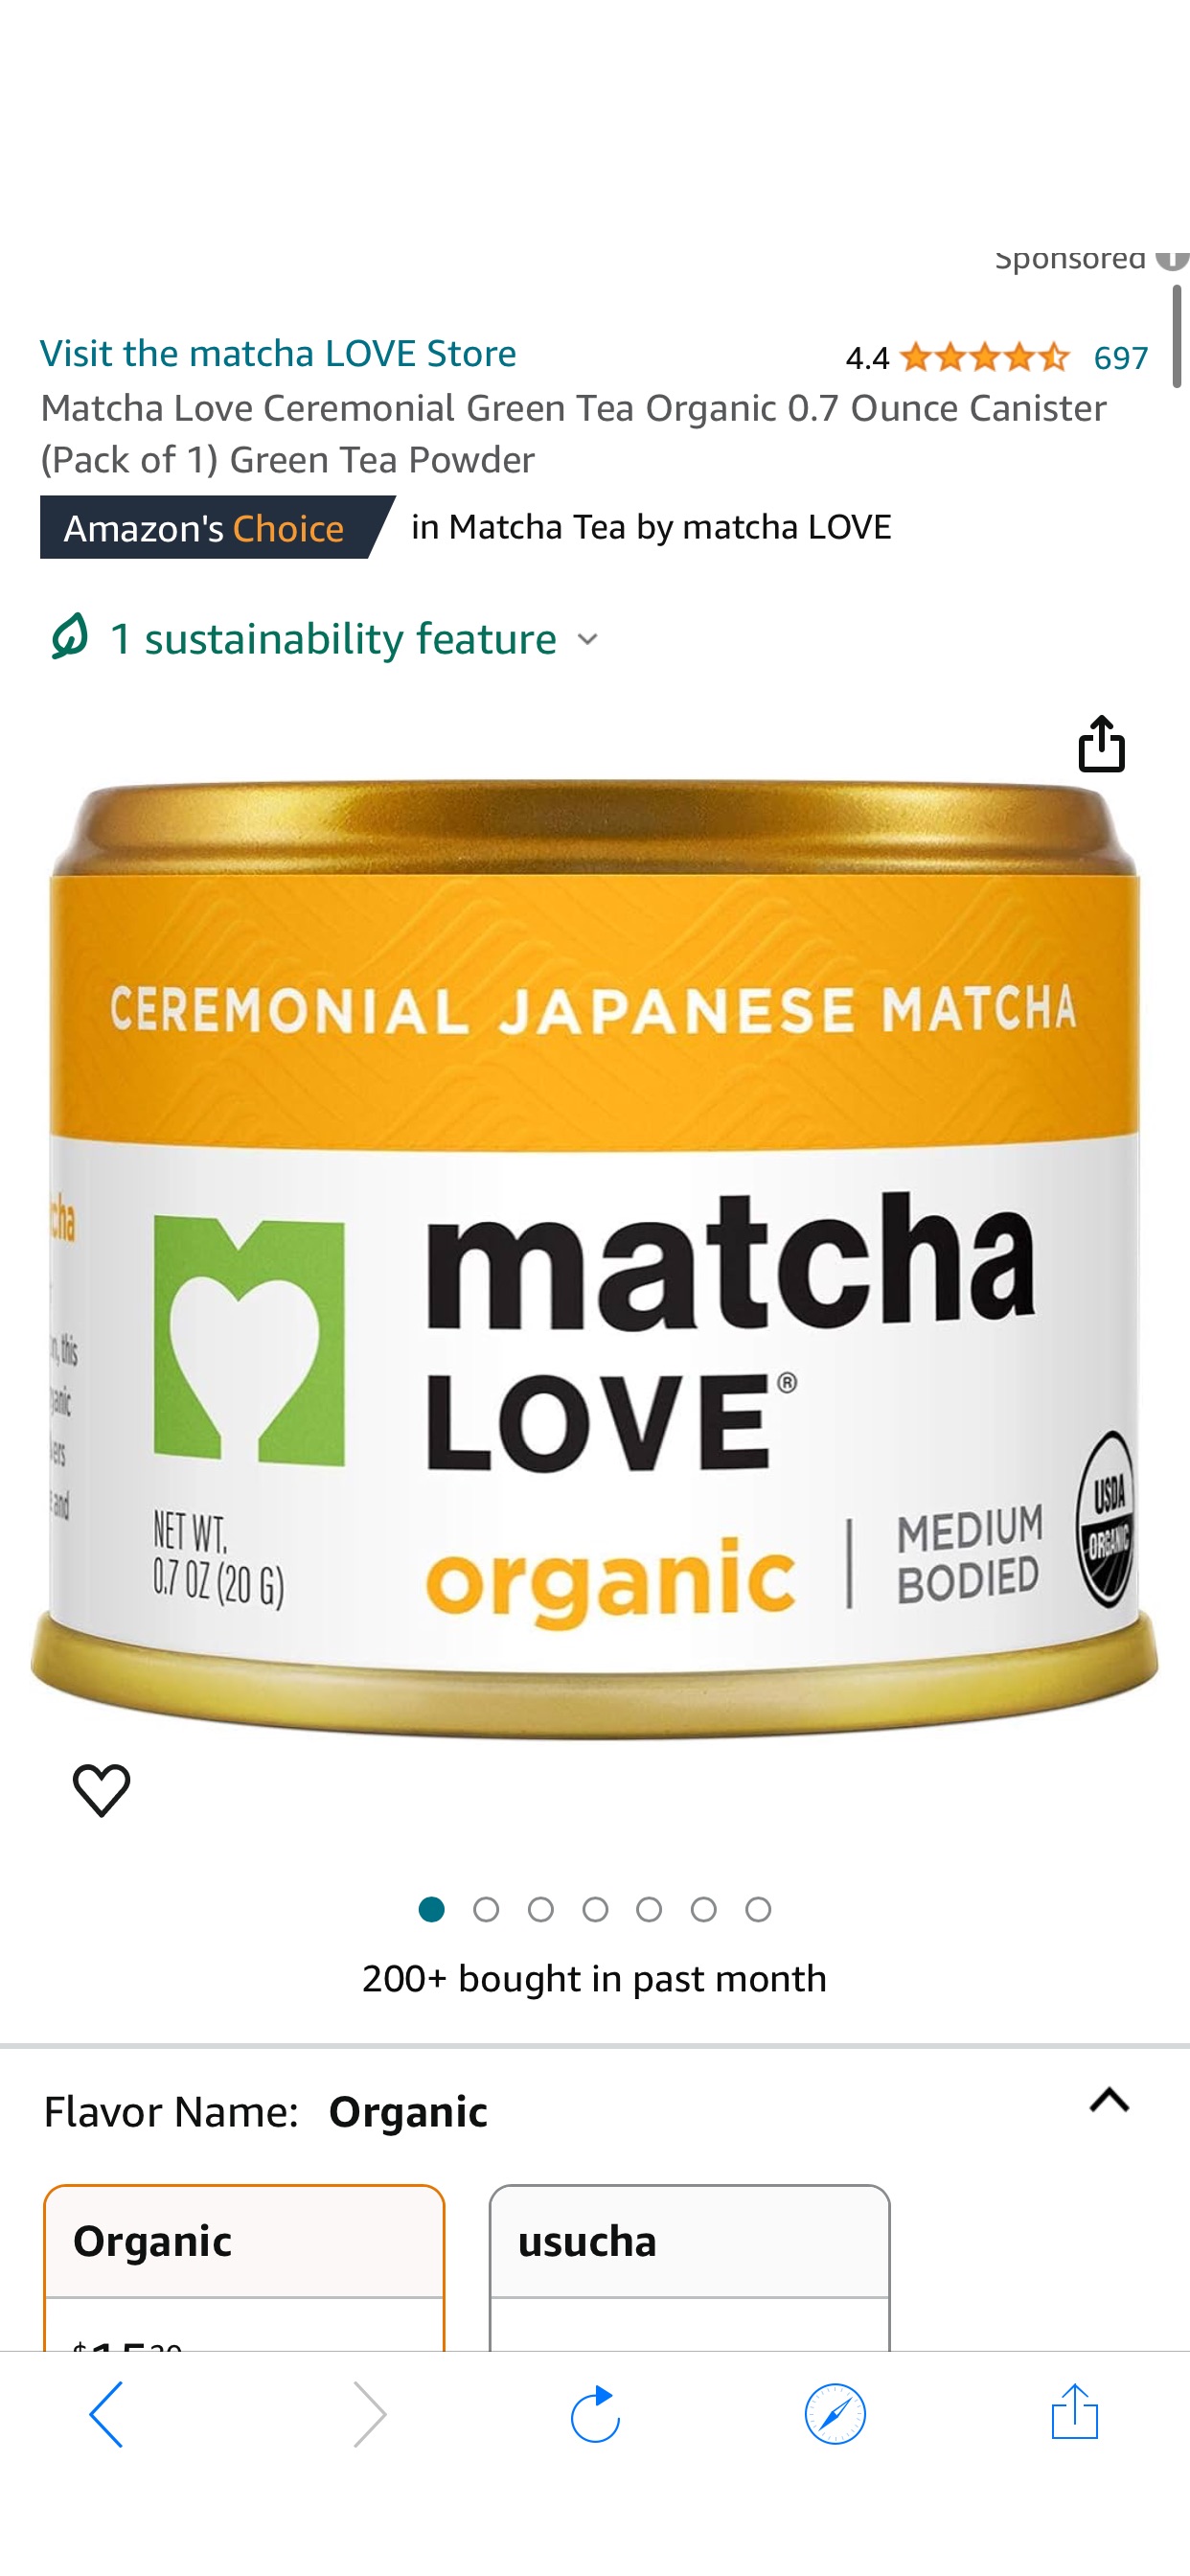 Amazon.com : Matcha Love Ceremonial Green Tea Organic 0.7 Ounce Canister (Pack of 1) Green Tea Powder : Everything Else 有机抹茶粉